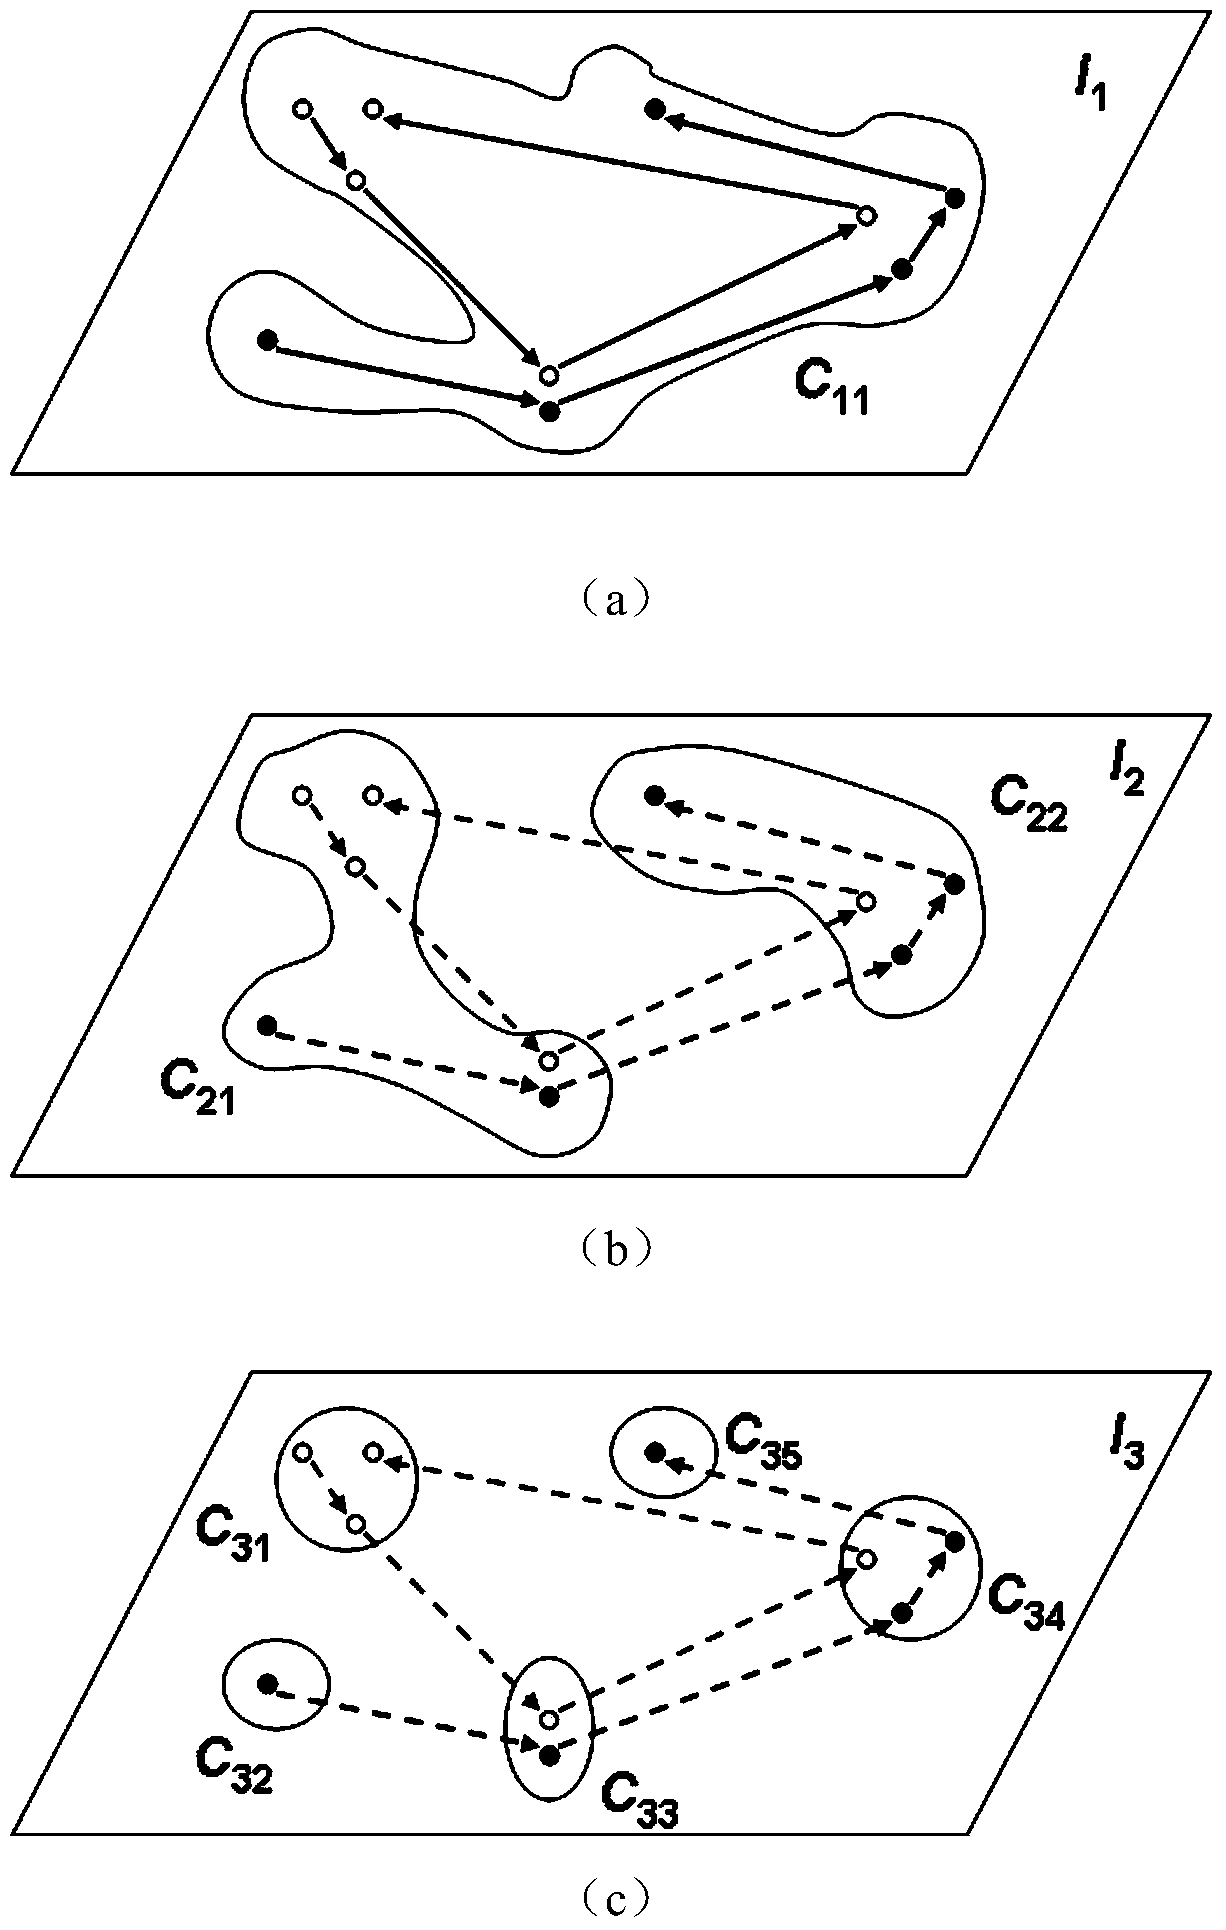 Social Group Discovery Method for Uncertain Action Semantics in Multi-Scale Space